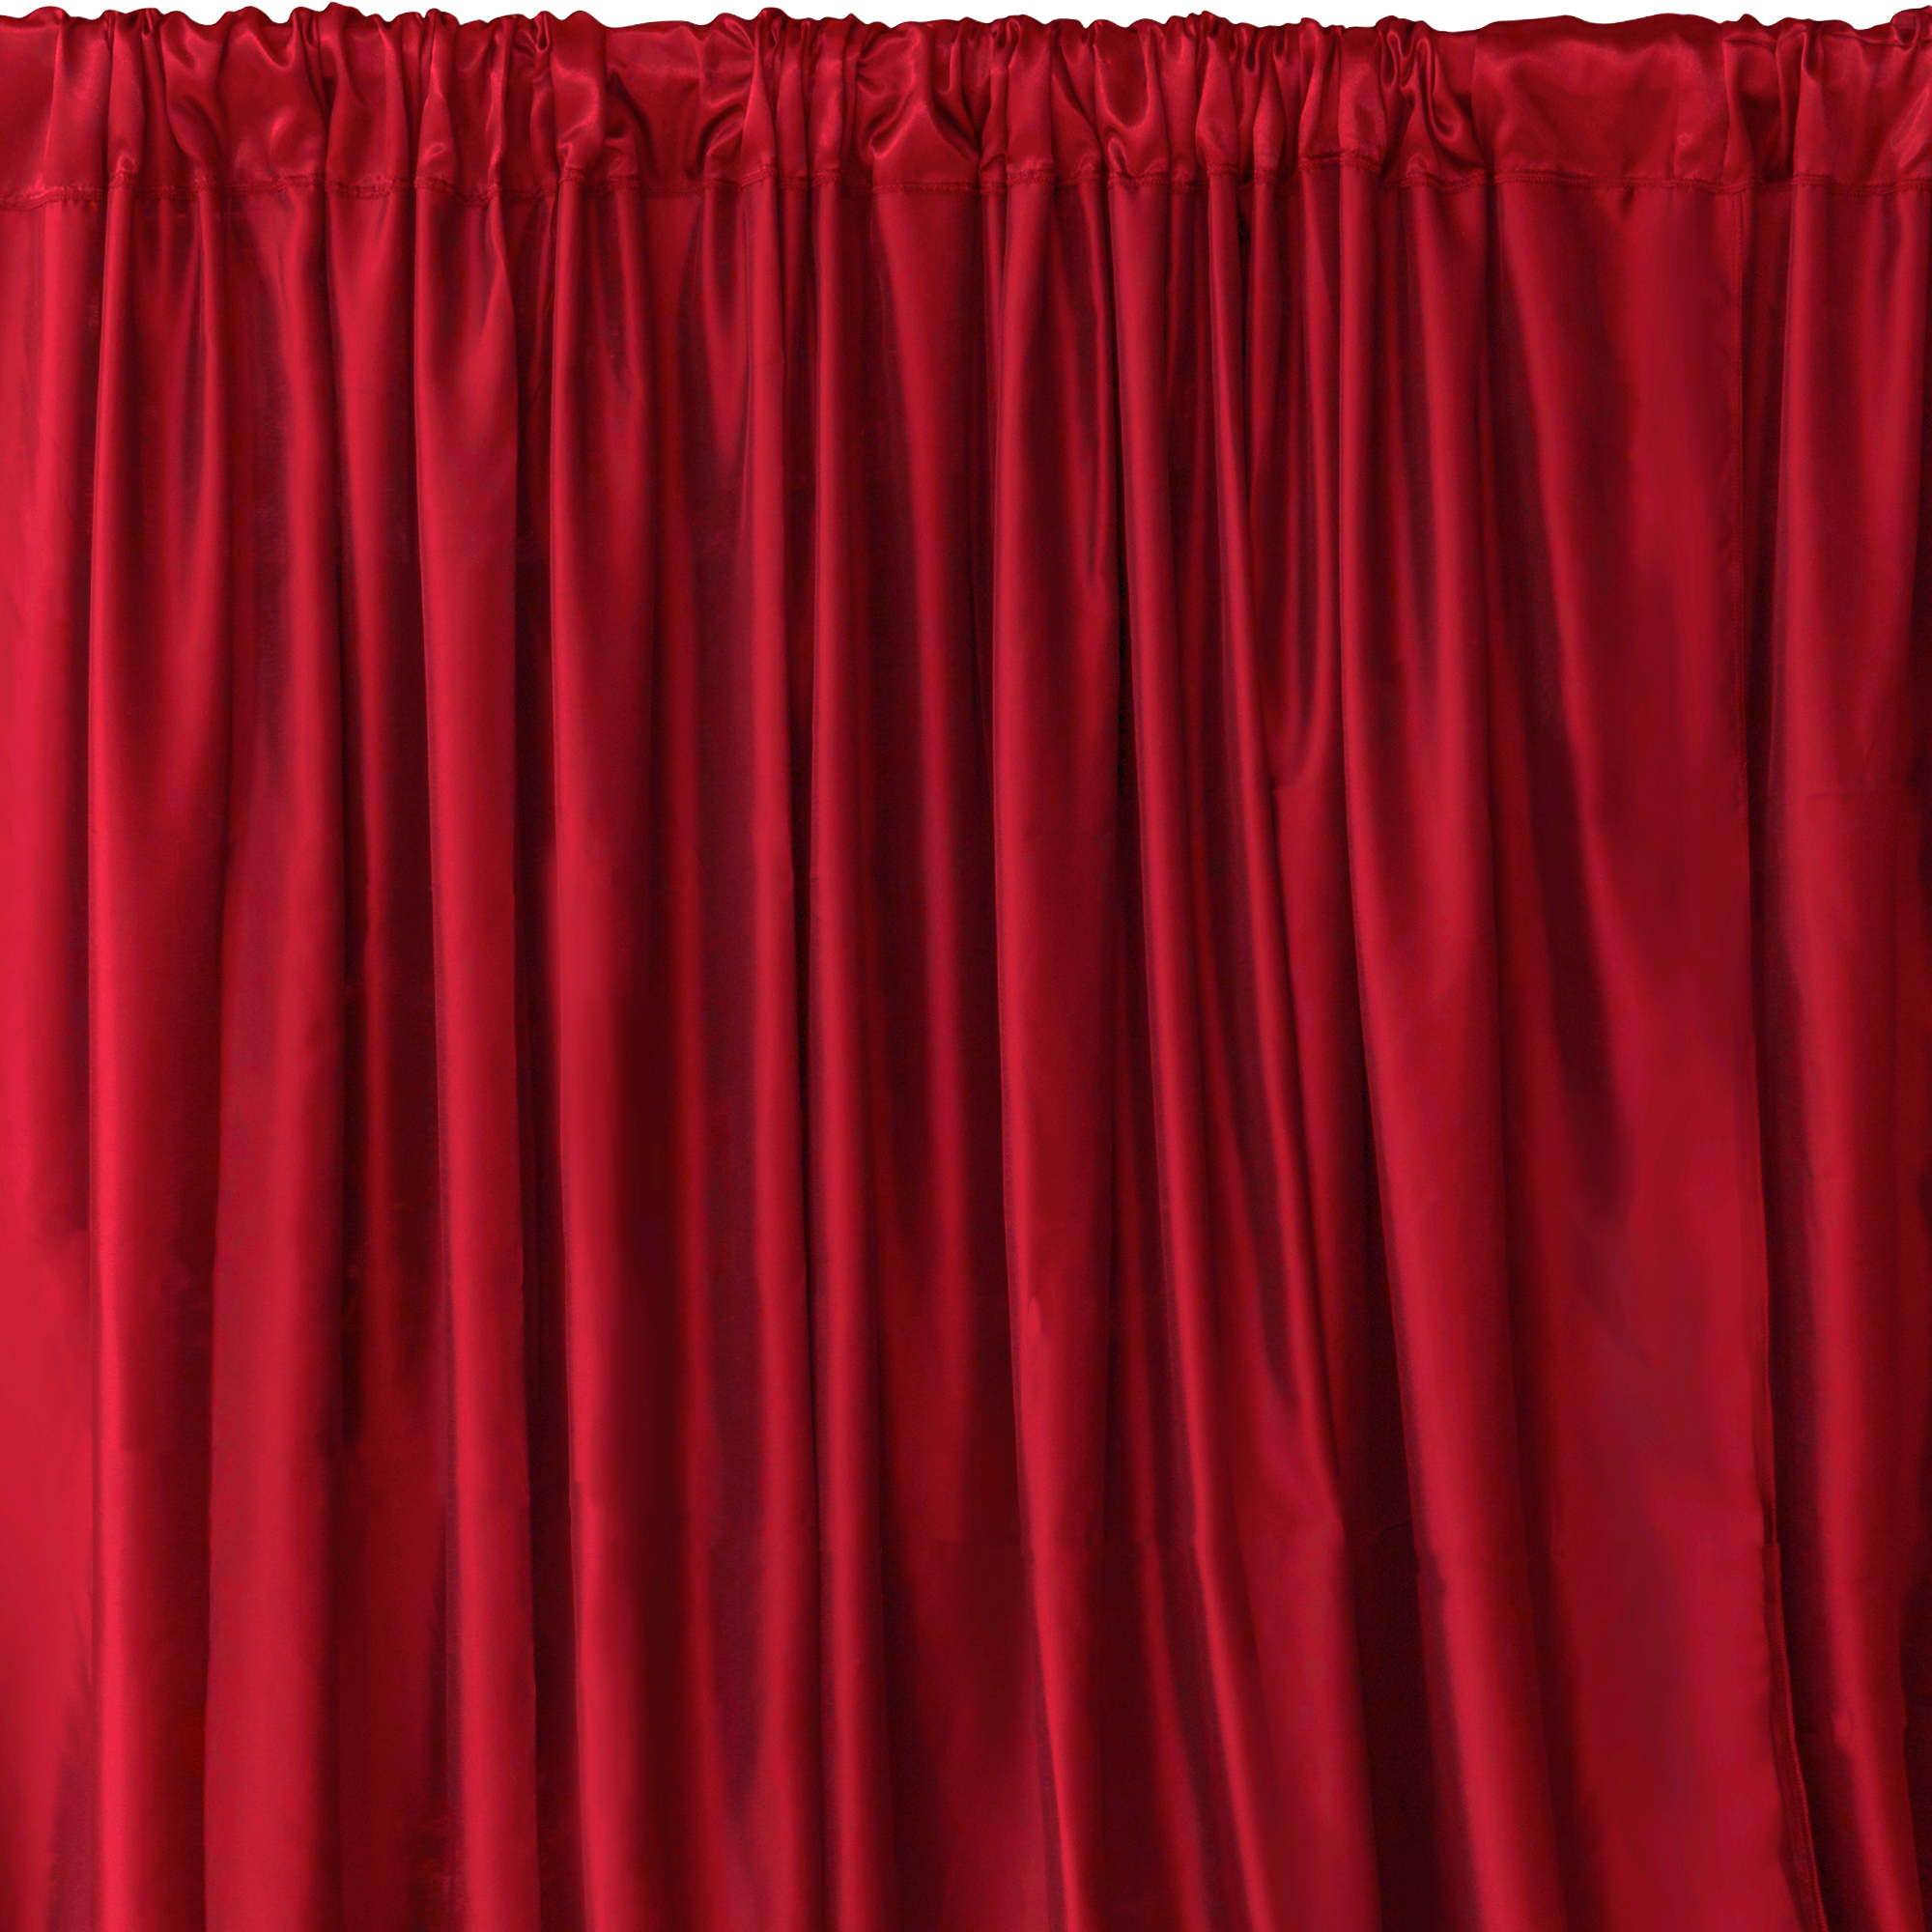 Satin Backdrop 10ft x 10ft - Red